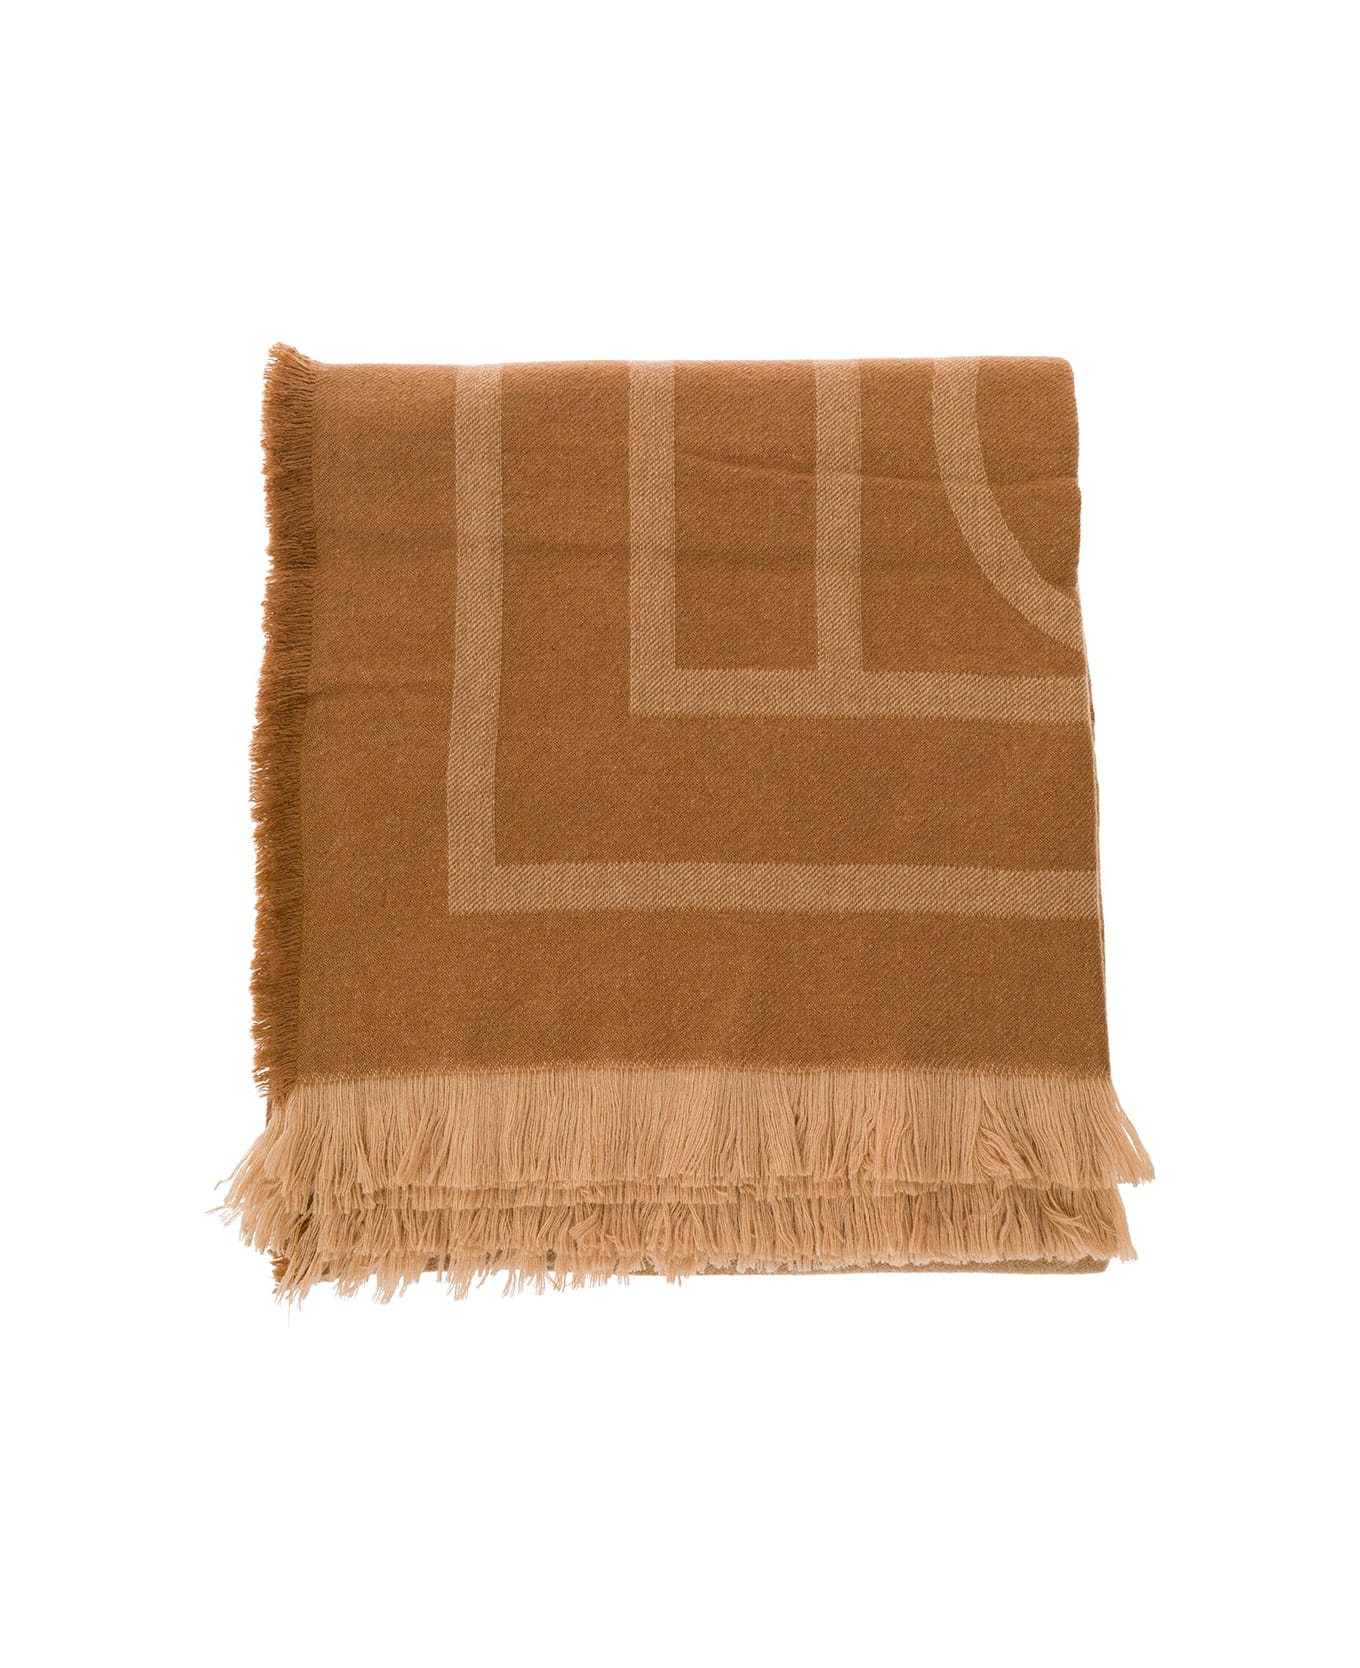 Totême Beige Scarf With Monogram Print In Wool And Cashmere Woman - Beige